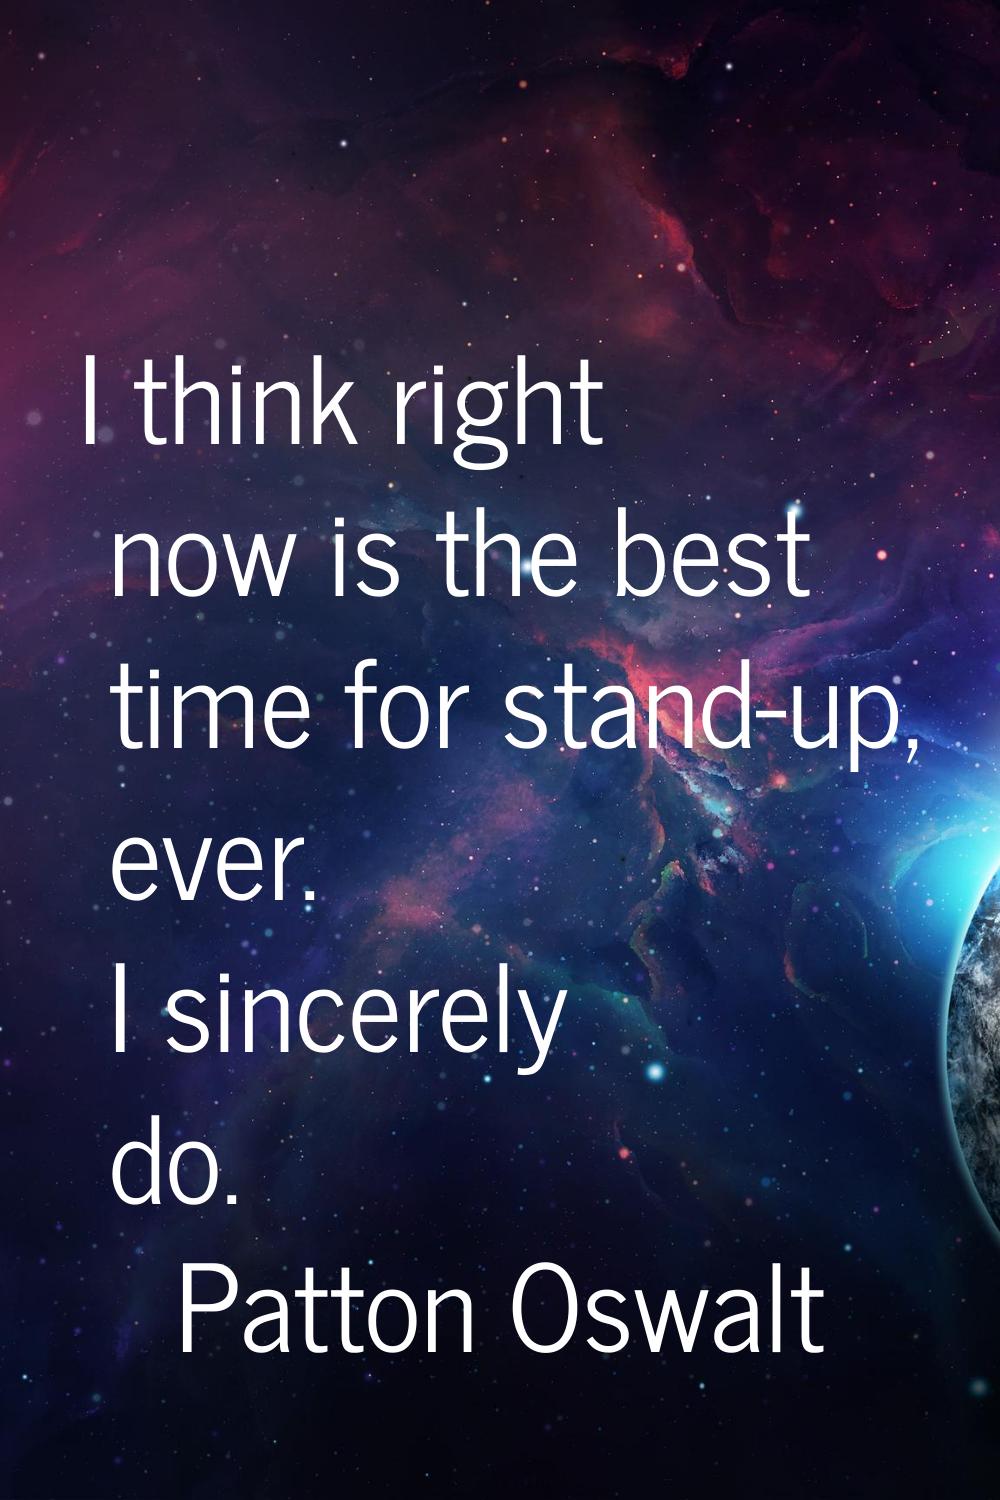 I think right now is the best time for stand-up, ever. I sincerely do.